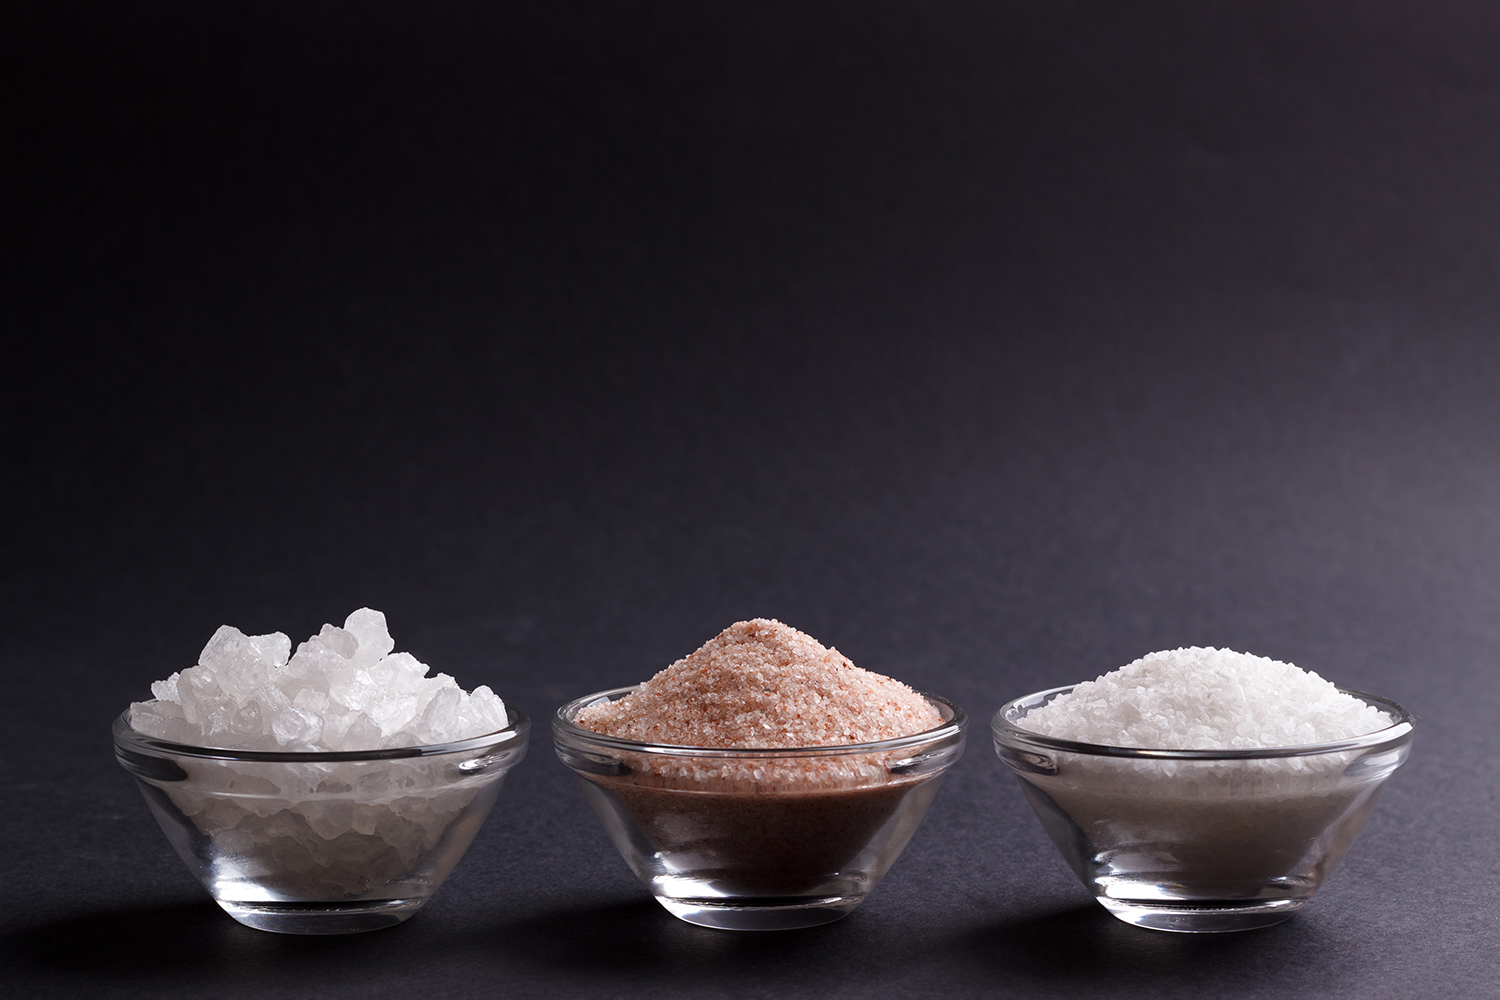 A Beginner's Guide to Kosher, Himalayan, Sea, and Table Salt